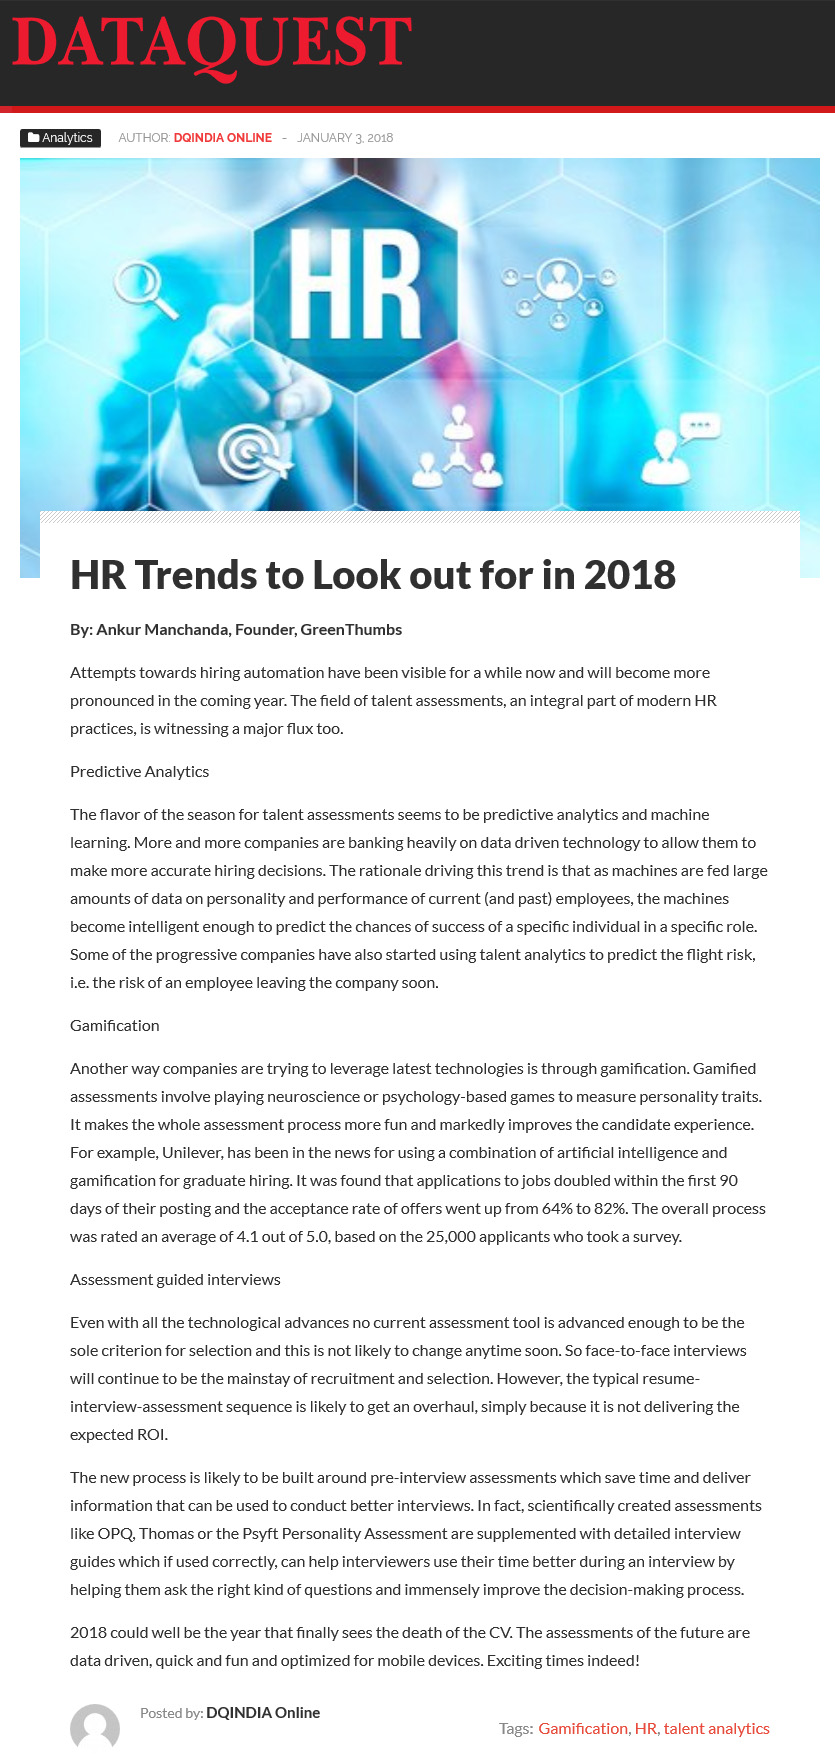 HR Trends to Look out for in 2018